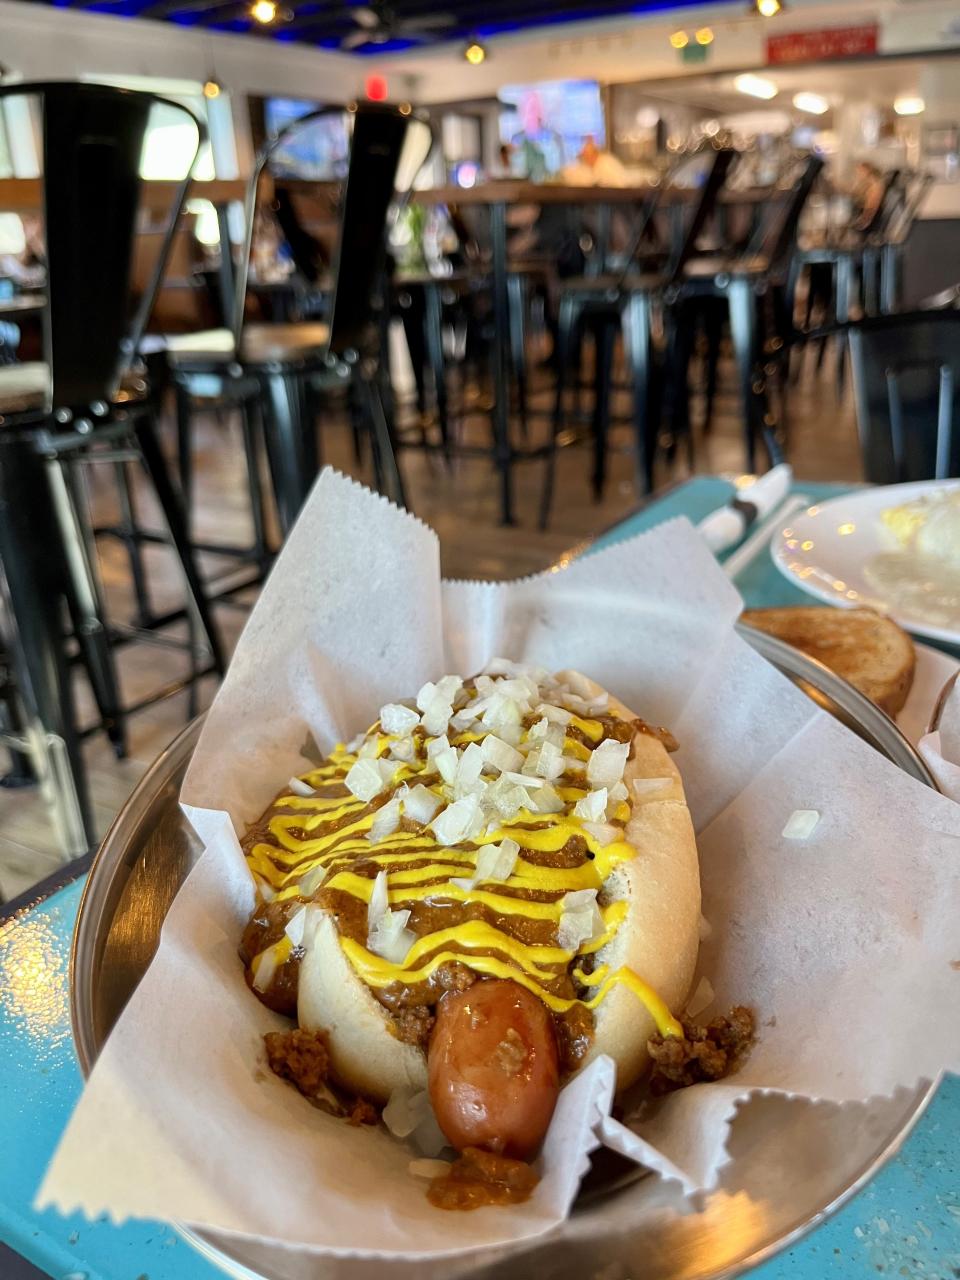 The MCC Special hot dog at Motor City Coney Island is topped with ground beef, chili, onions and mustard.